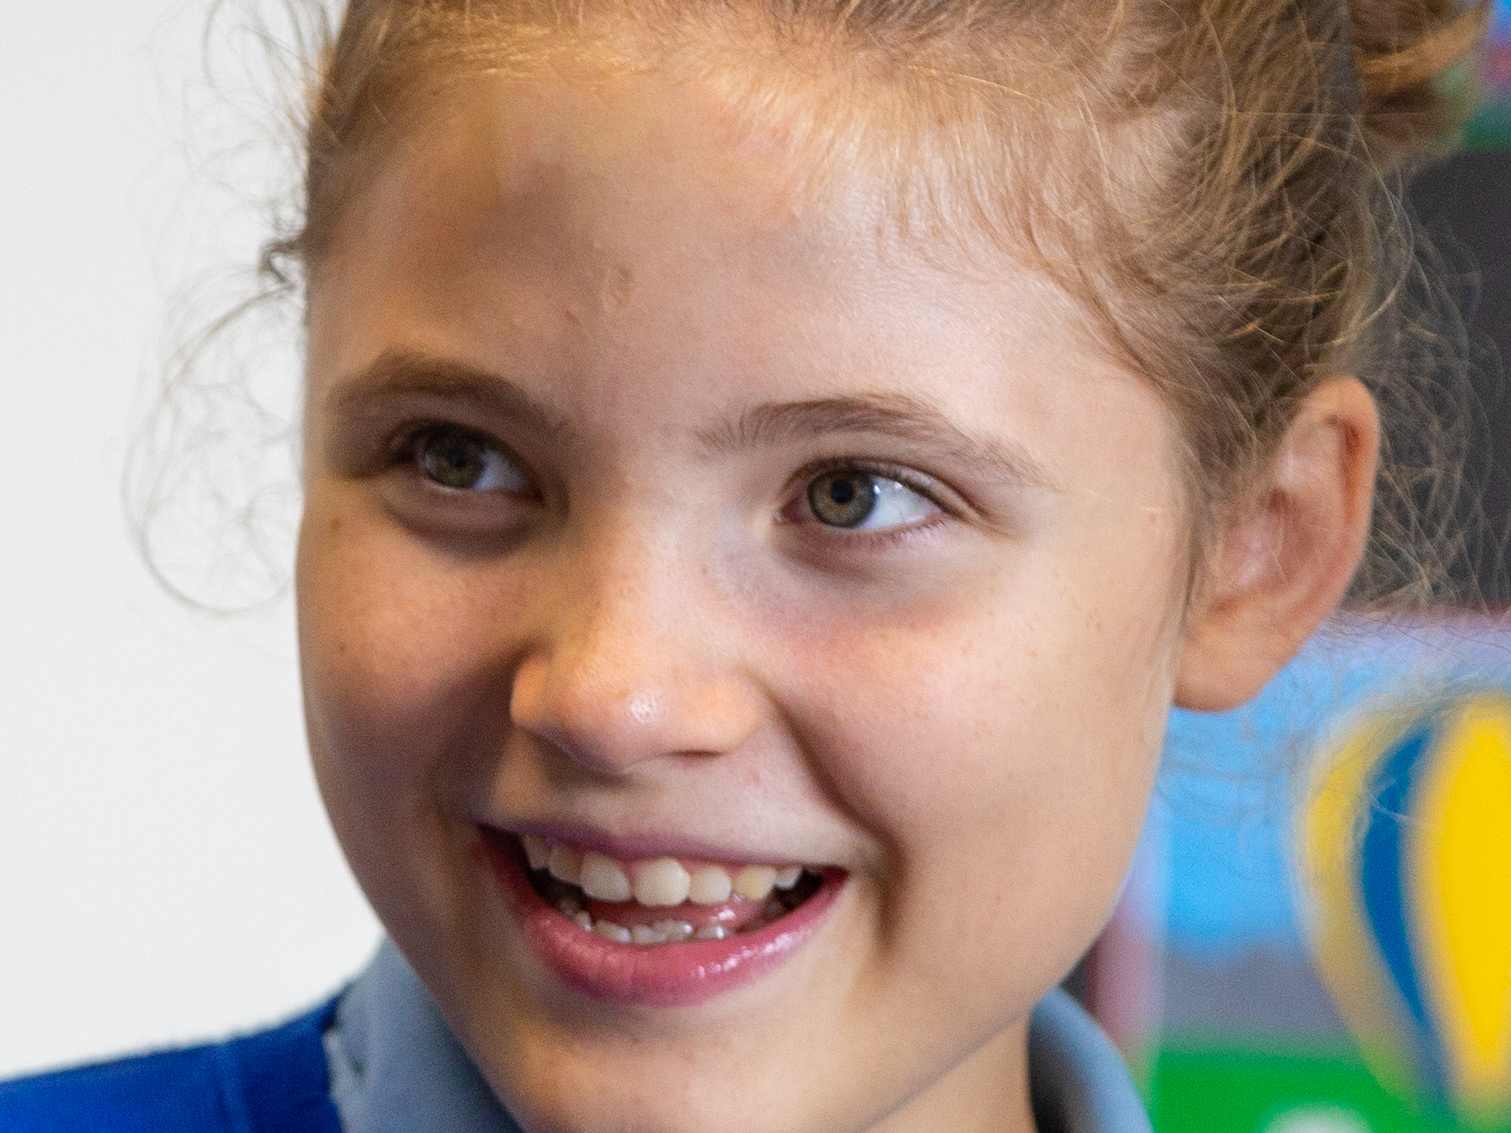 Violet is an young girl with learning difficulties having her school photo